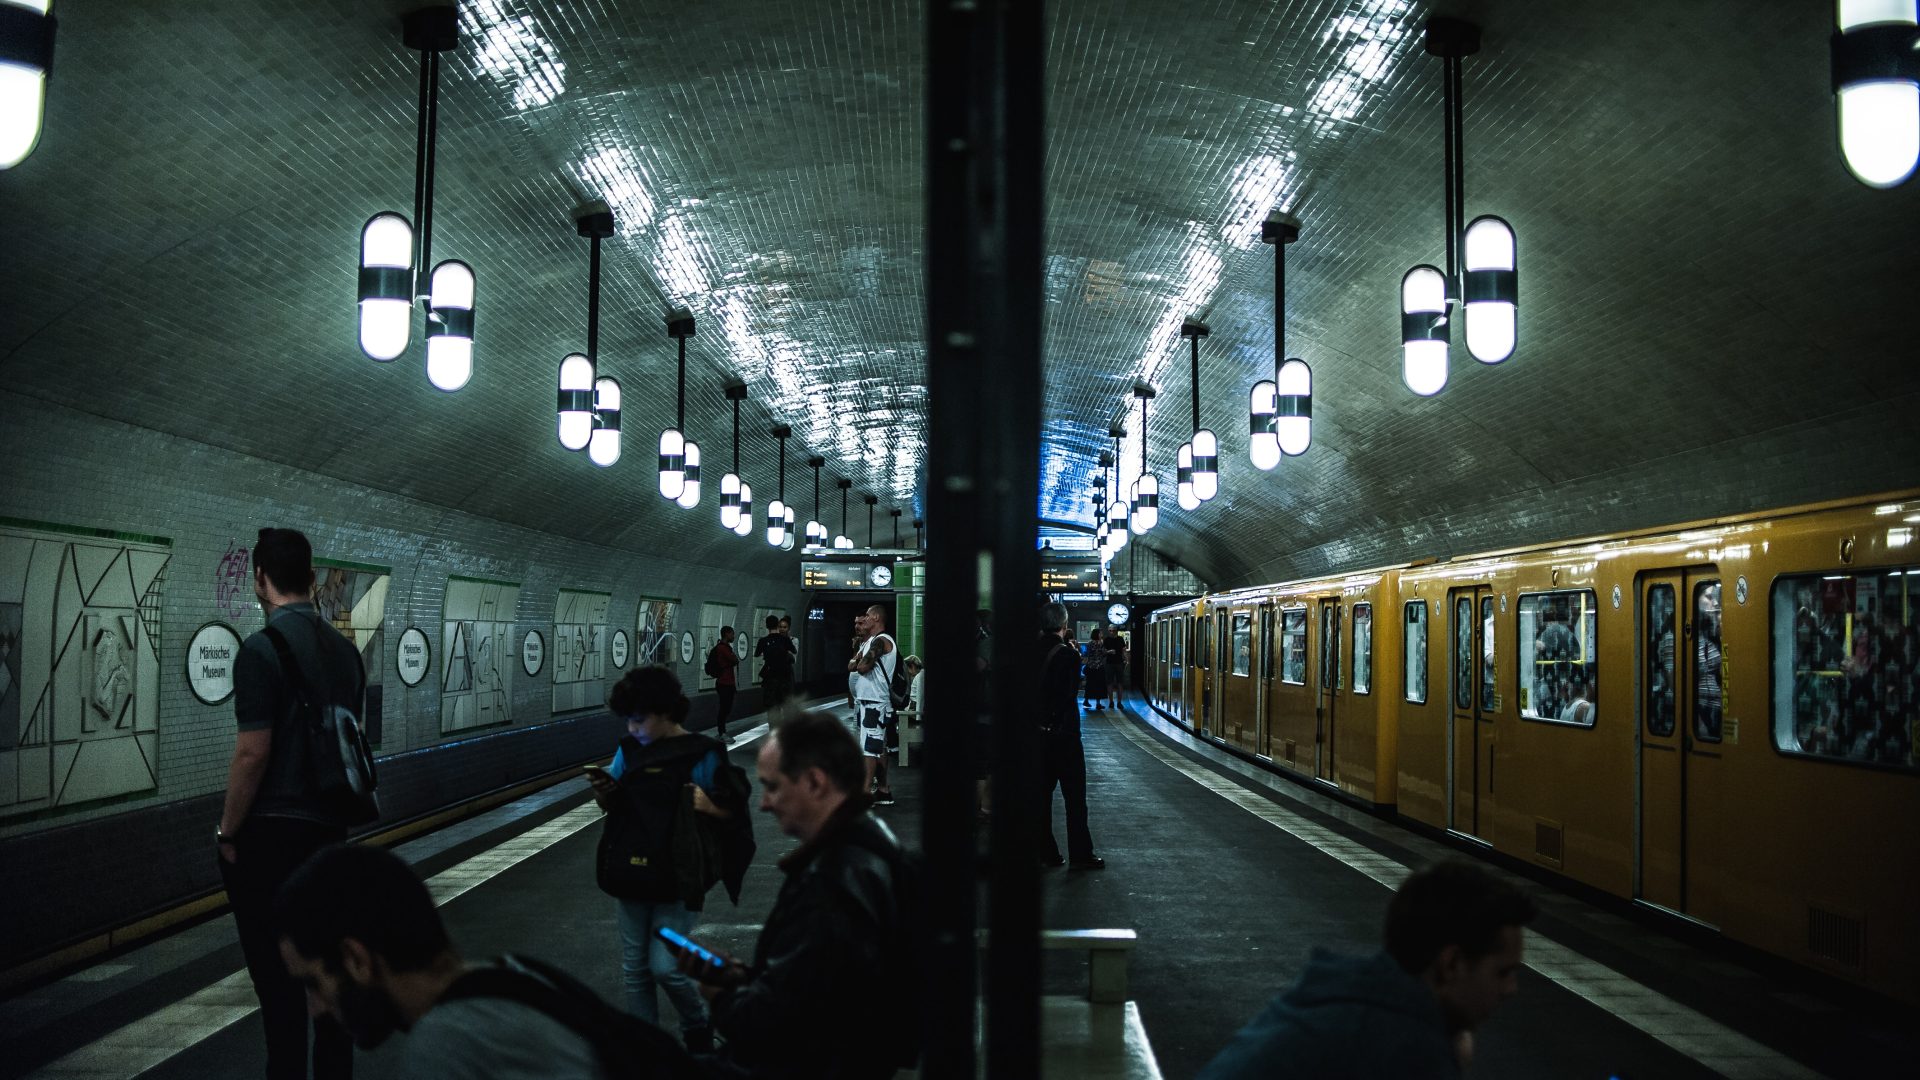 A German subway station is named after a racial slur. Why is this still happening?